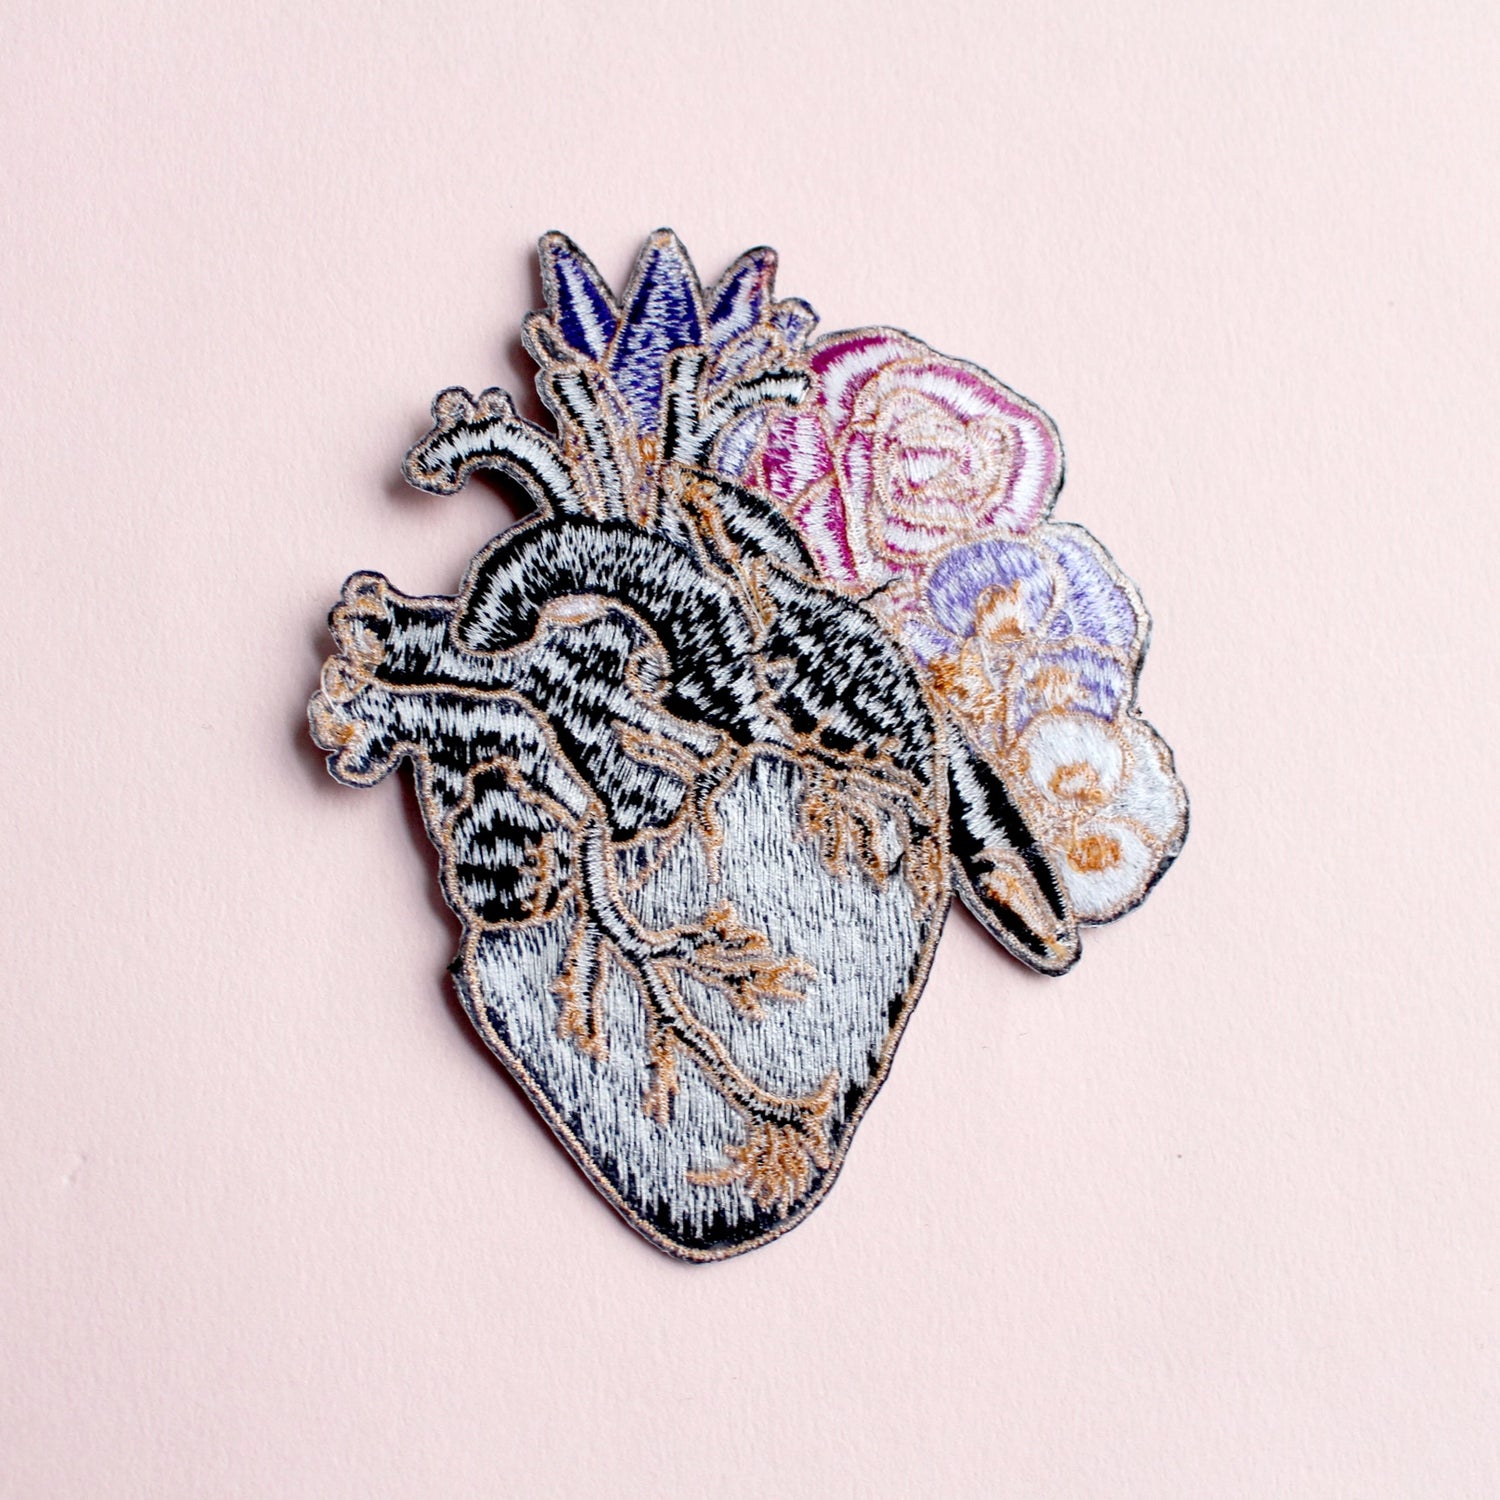 Anatomical Heart Embroidered Iron-On Patch - Moon Room Shop and Wellness